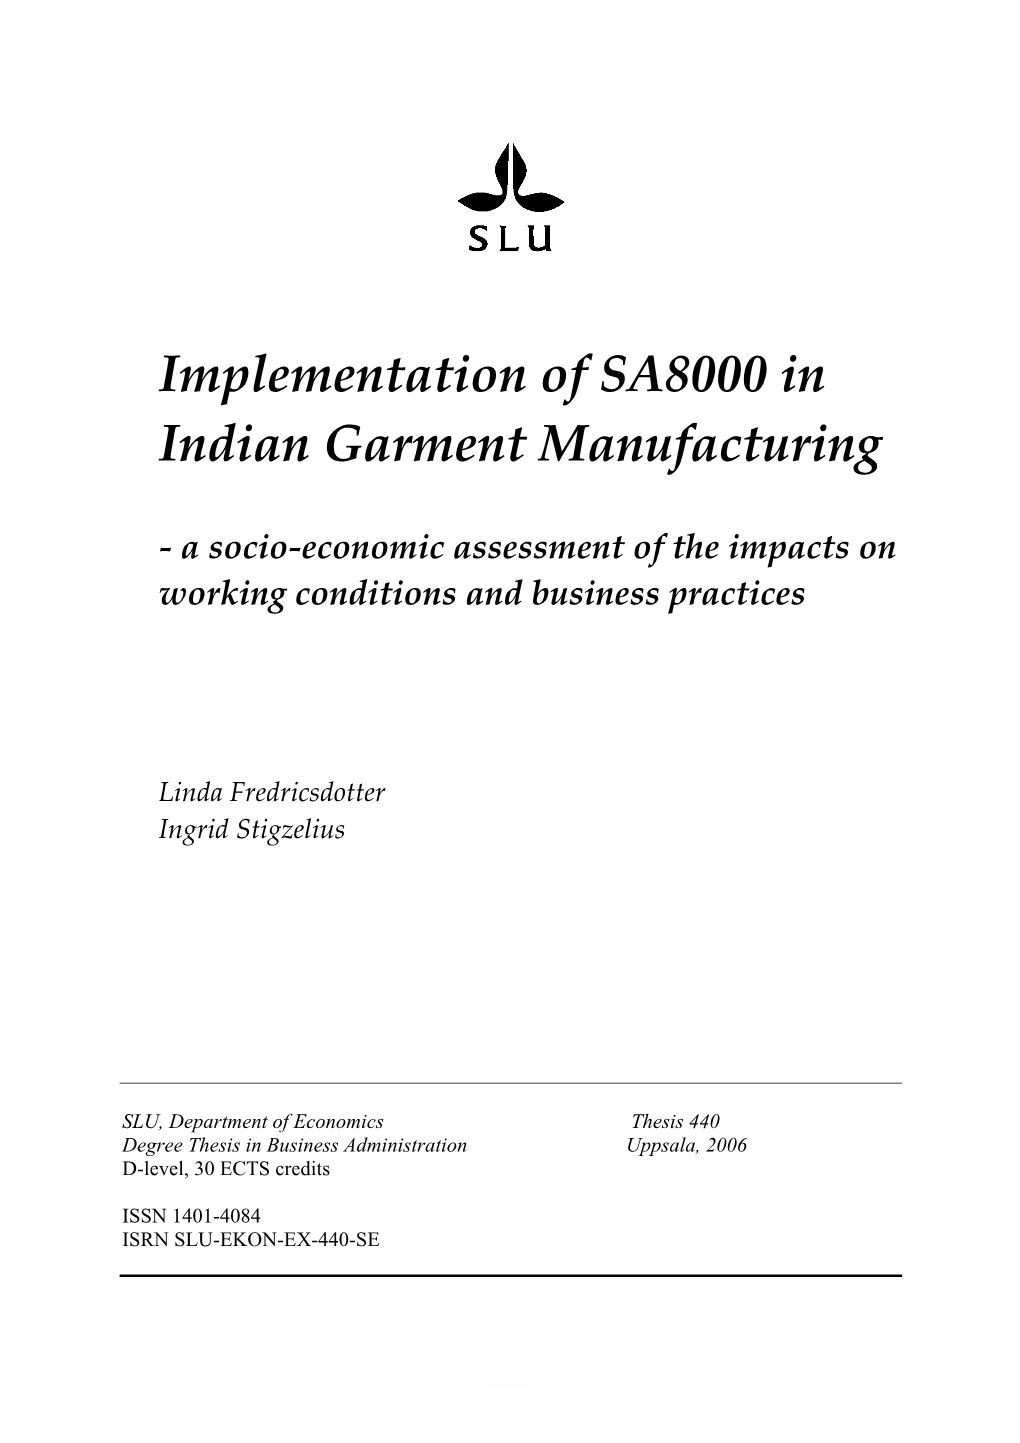 Implementation of SA8000 in Indian Garment Manufacturing